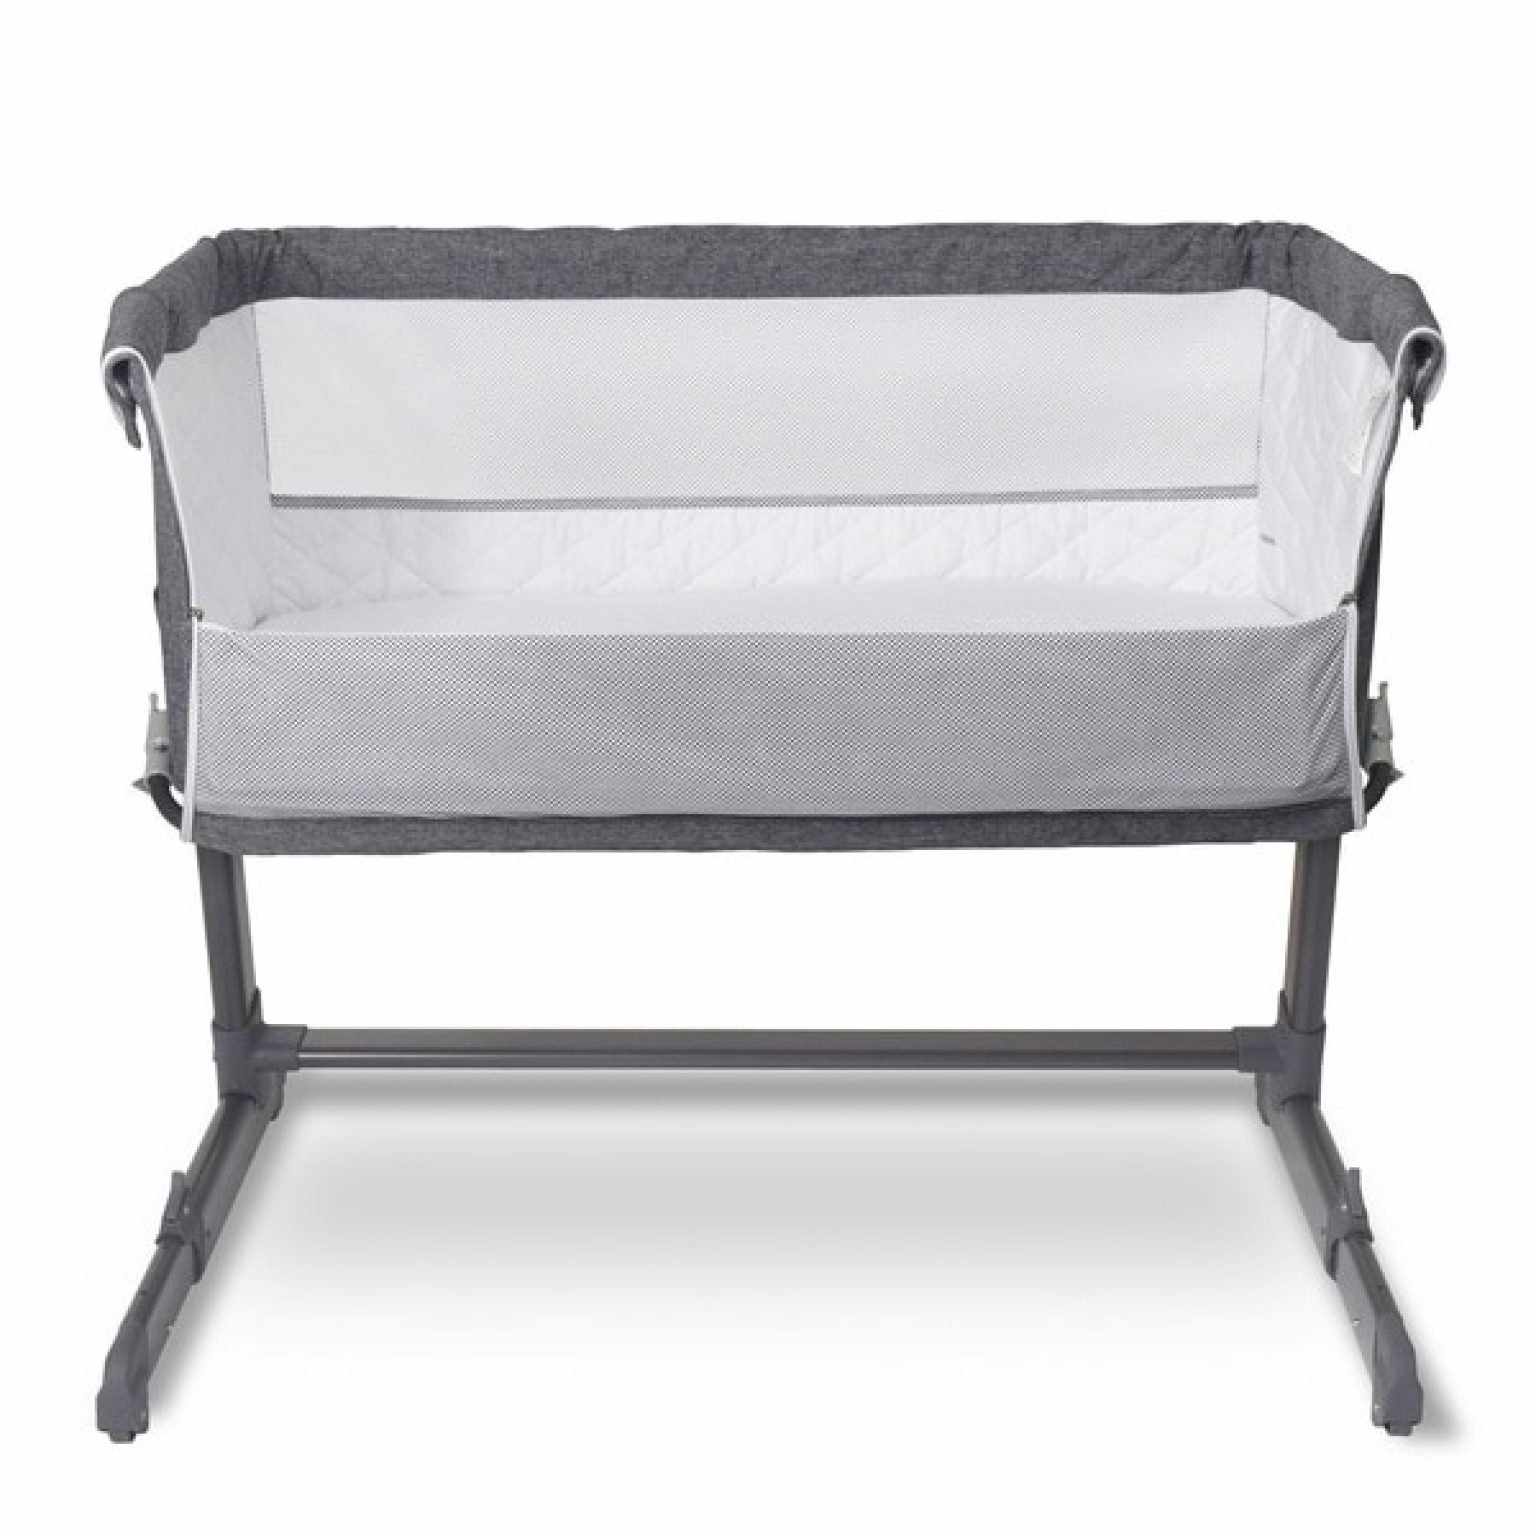 Babylo Cozi Sleeper Review- Create A Strong Bond With Your Baby - Kids ...